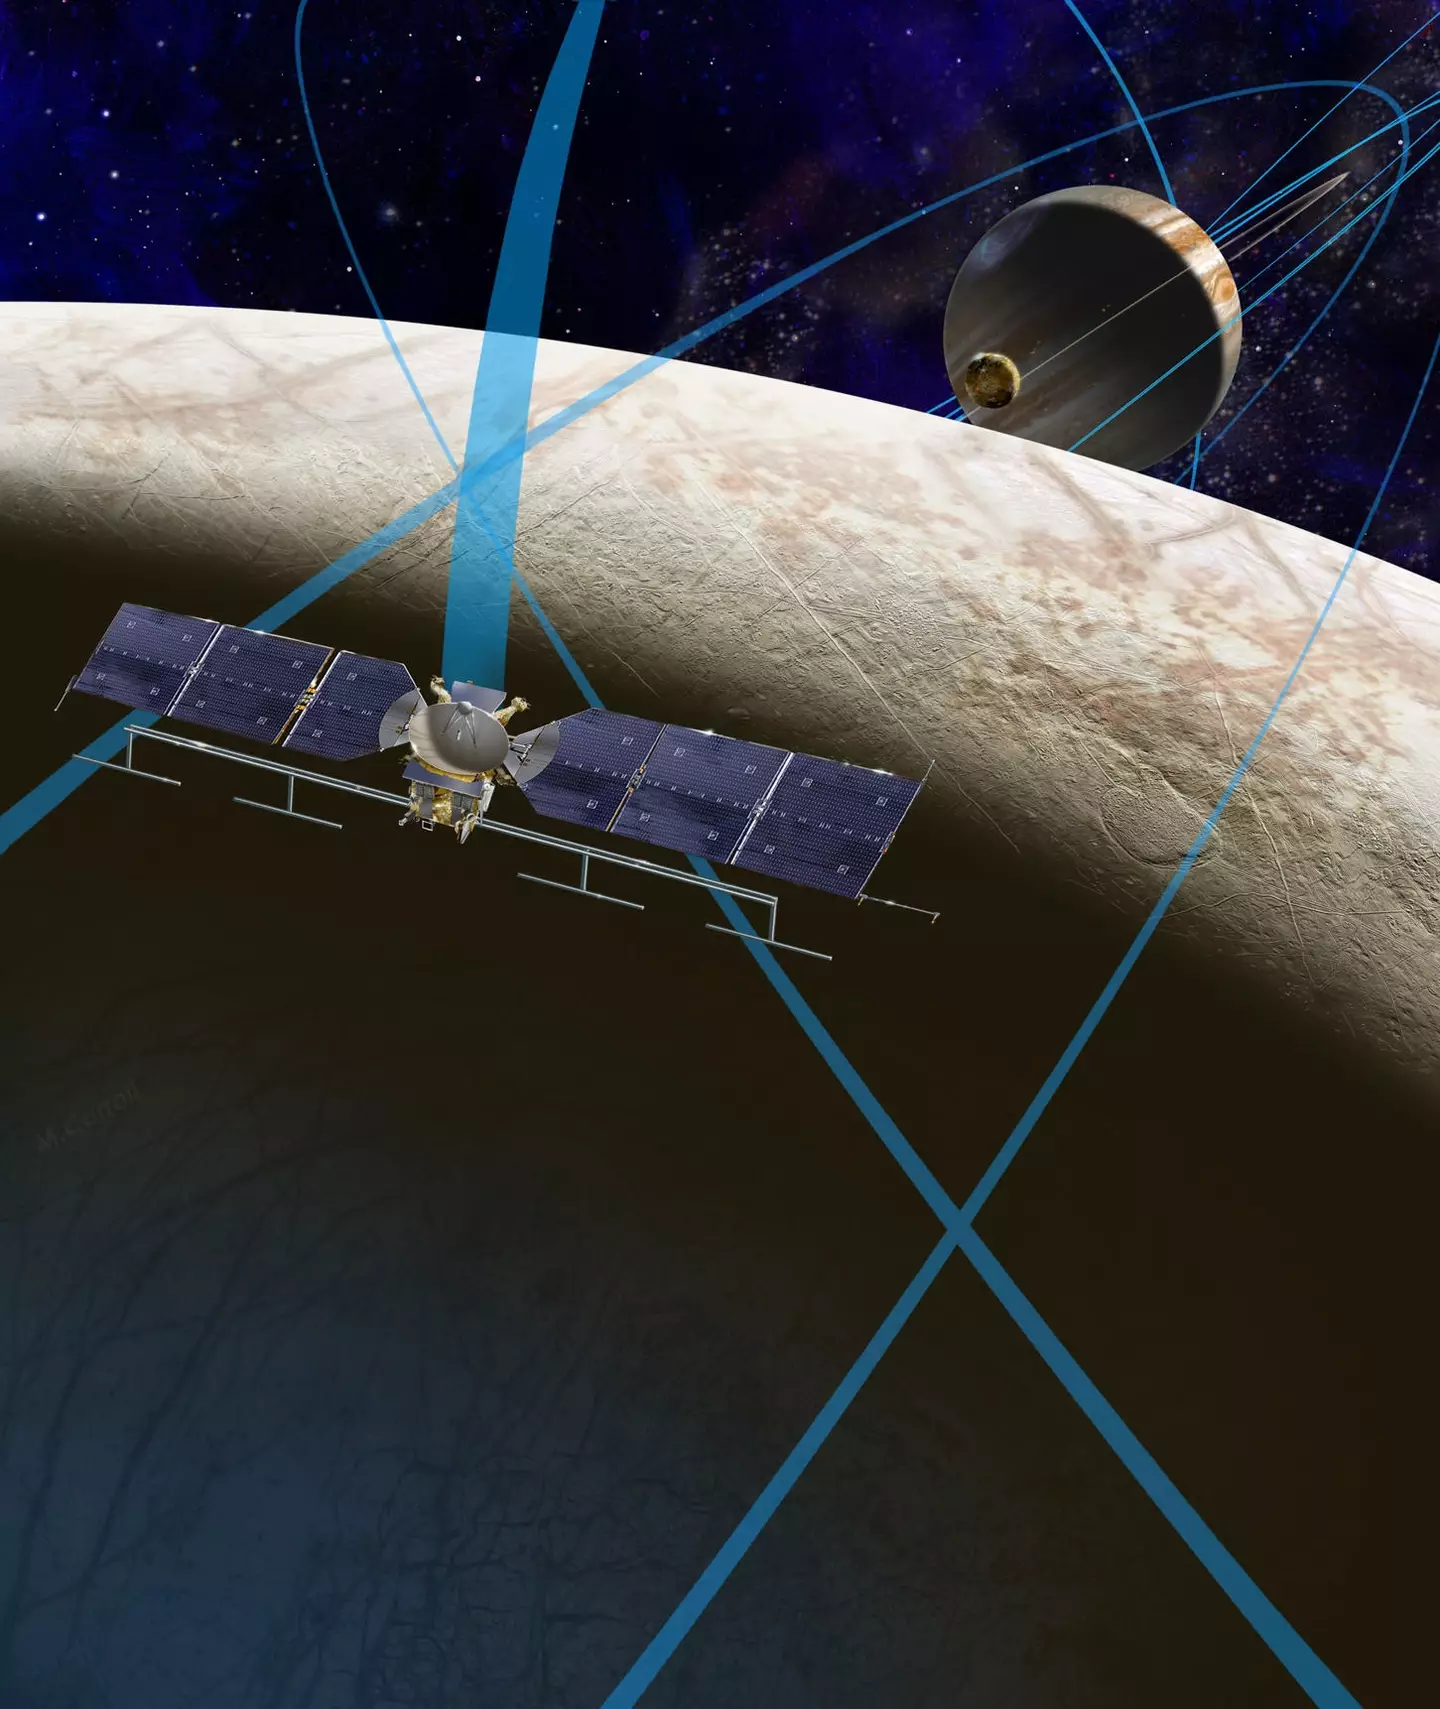 The Europa Clipper will get closer to the icy moon than ever before.